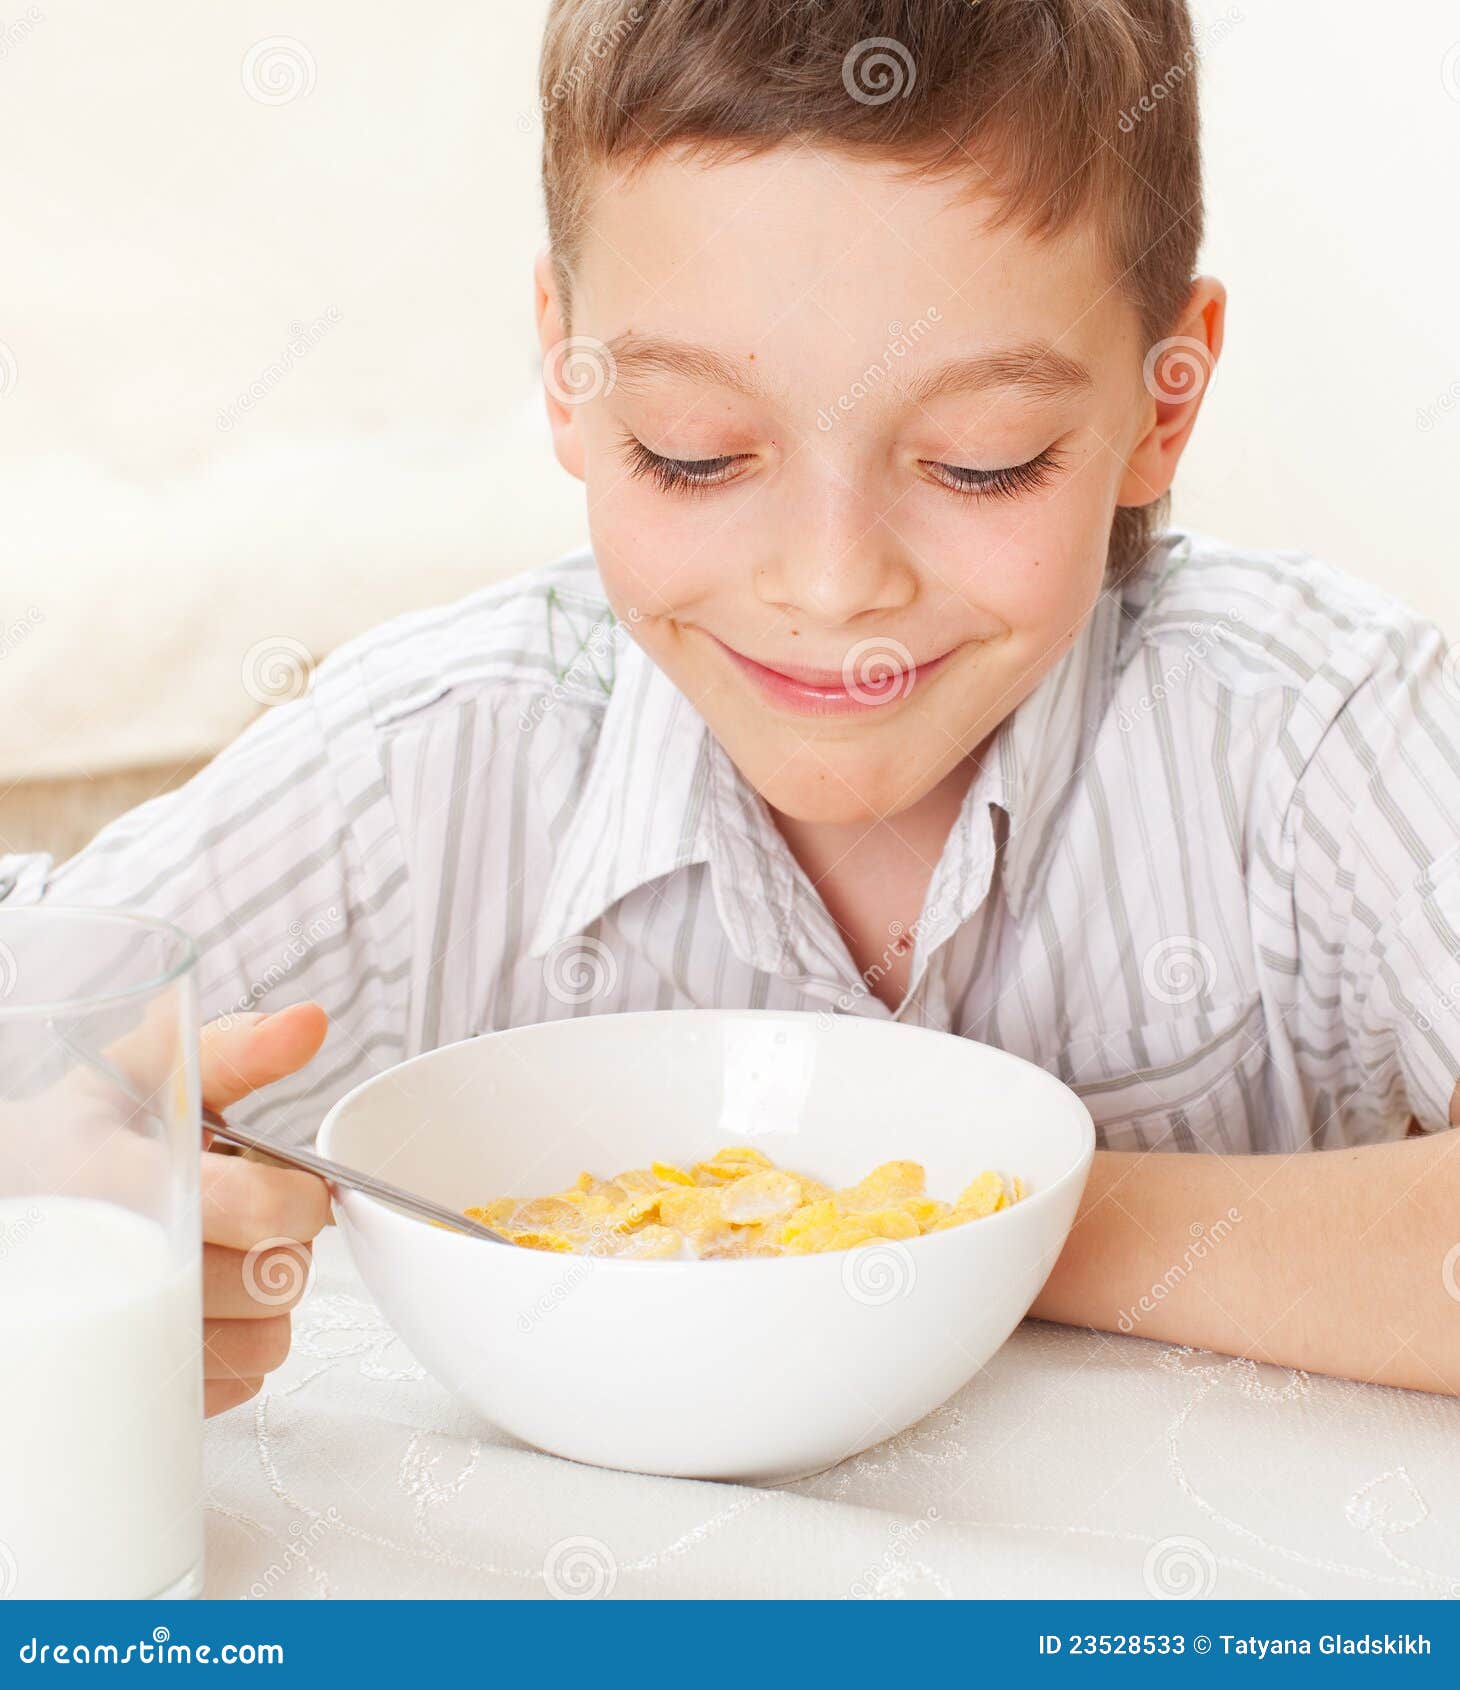 Child Eat Breakfast At Home Stock Photos - Image: 23528533